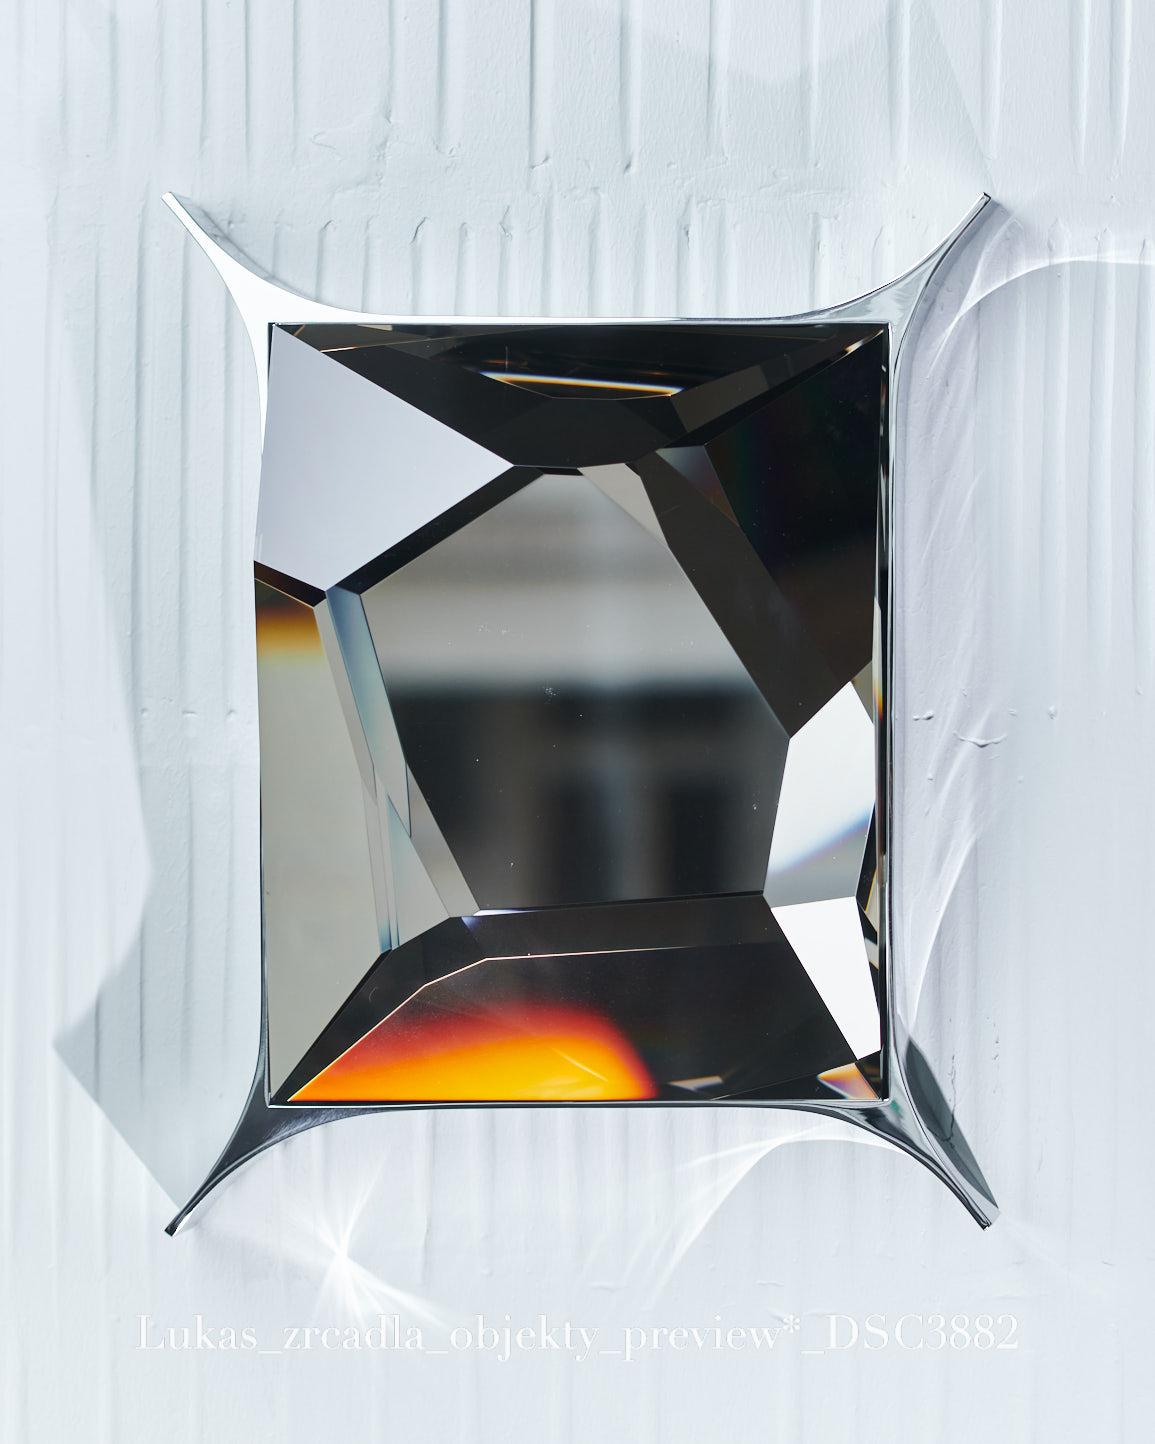 Cut Optical Glass Wall Sculpture by Lukas Novak
Dimensions: D 10 x W 37 x H 47 cm
Materials: Cut Optical Glass

Born in Nový Bor Czech republic which is like capital city of glass in the world. He is an artist, multidisciplinary designer,